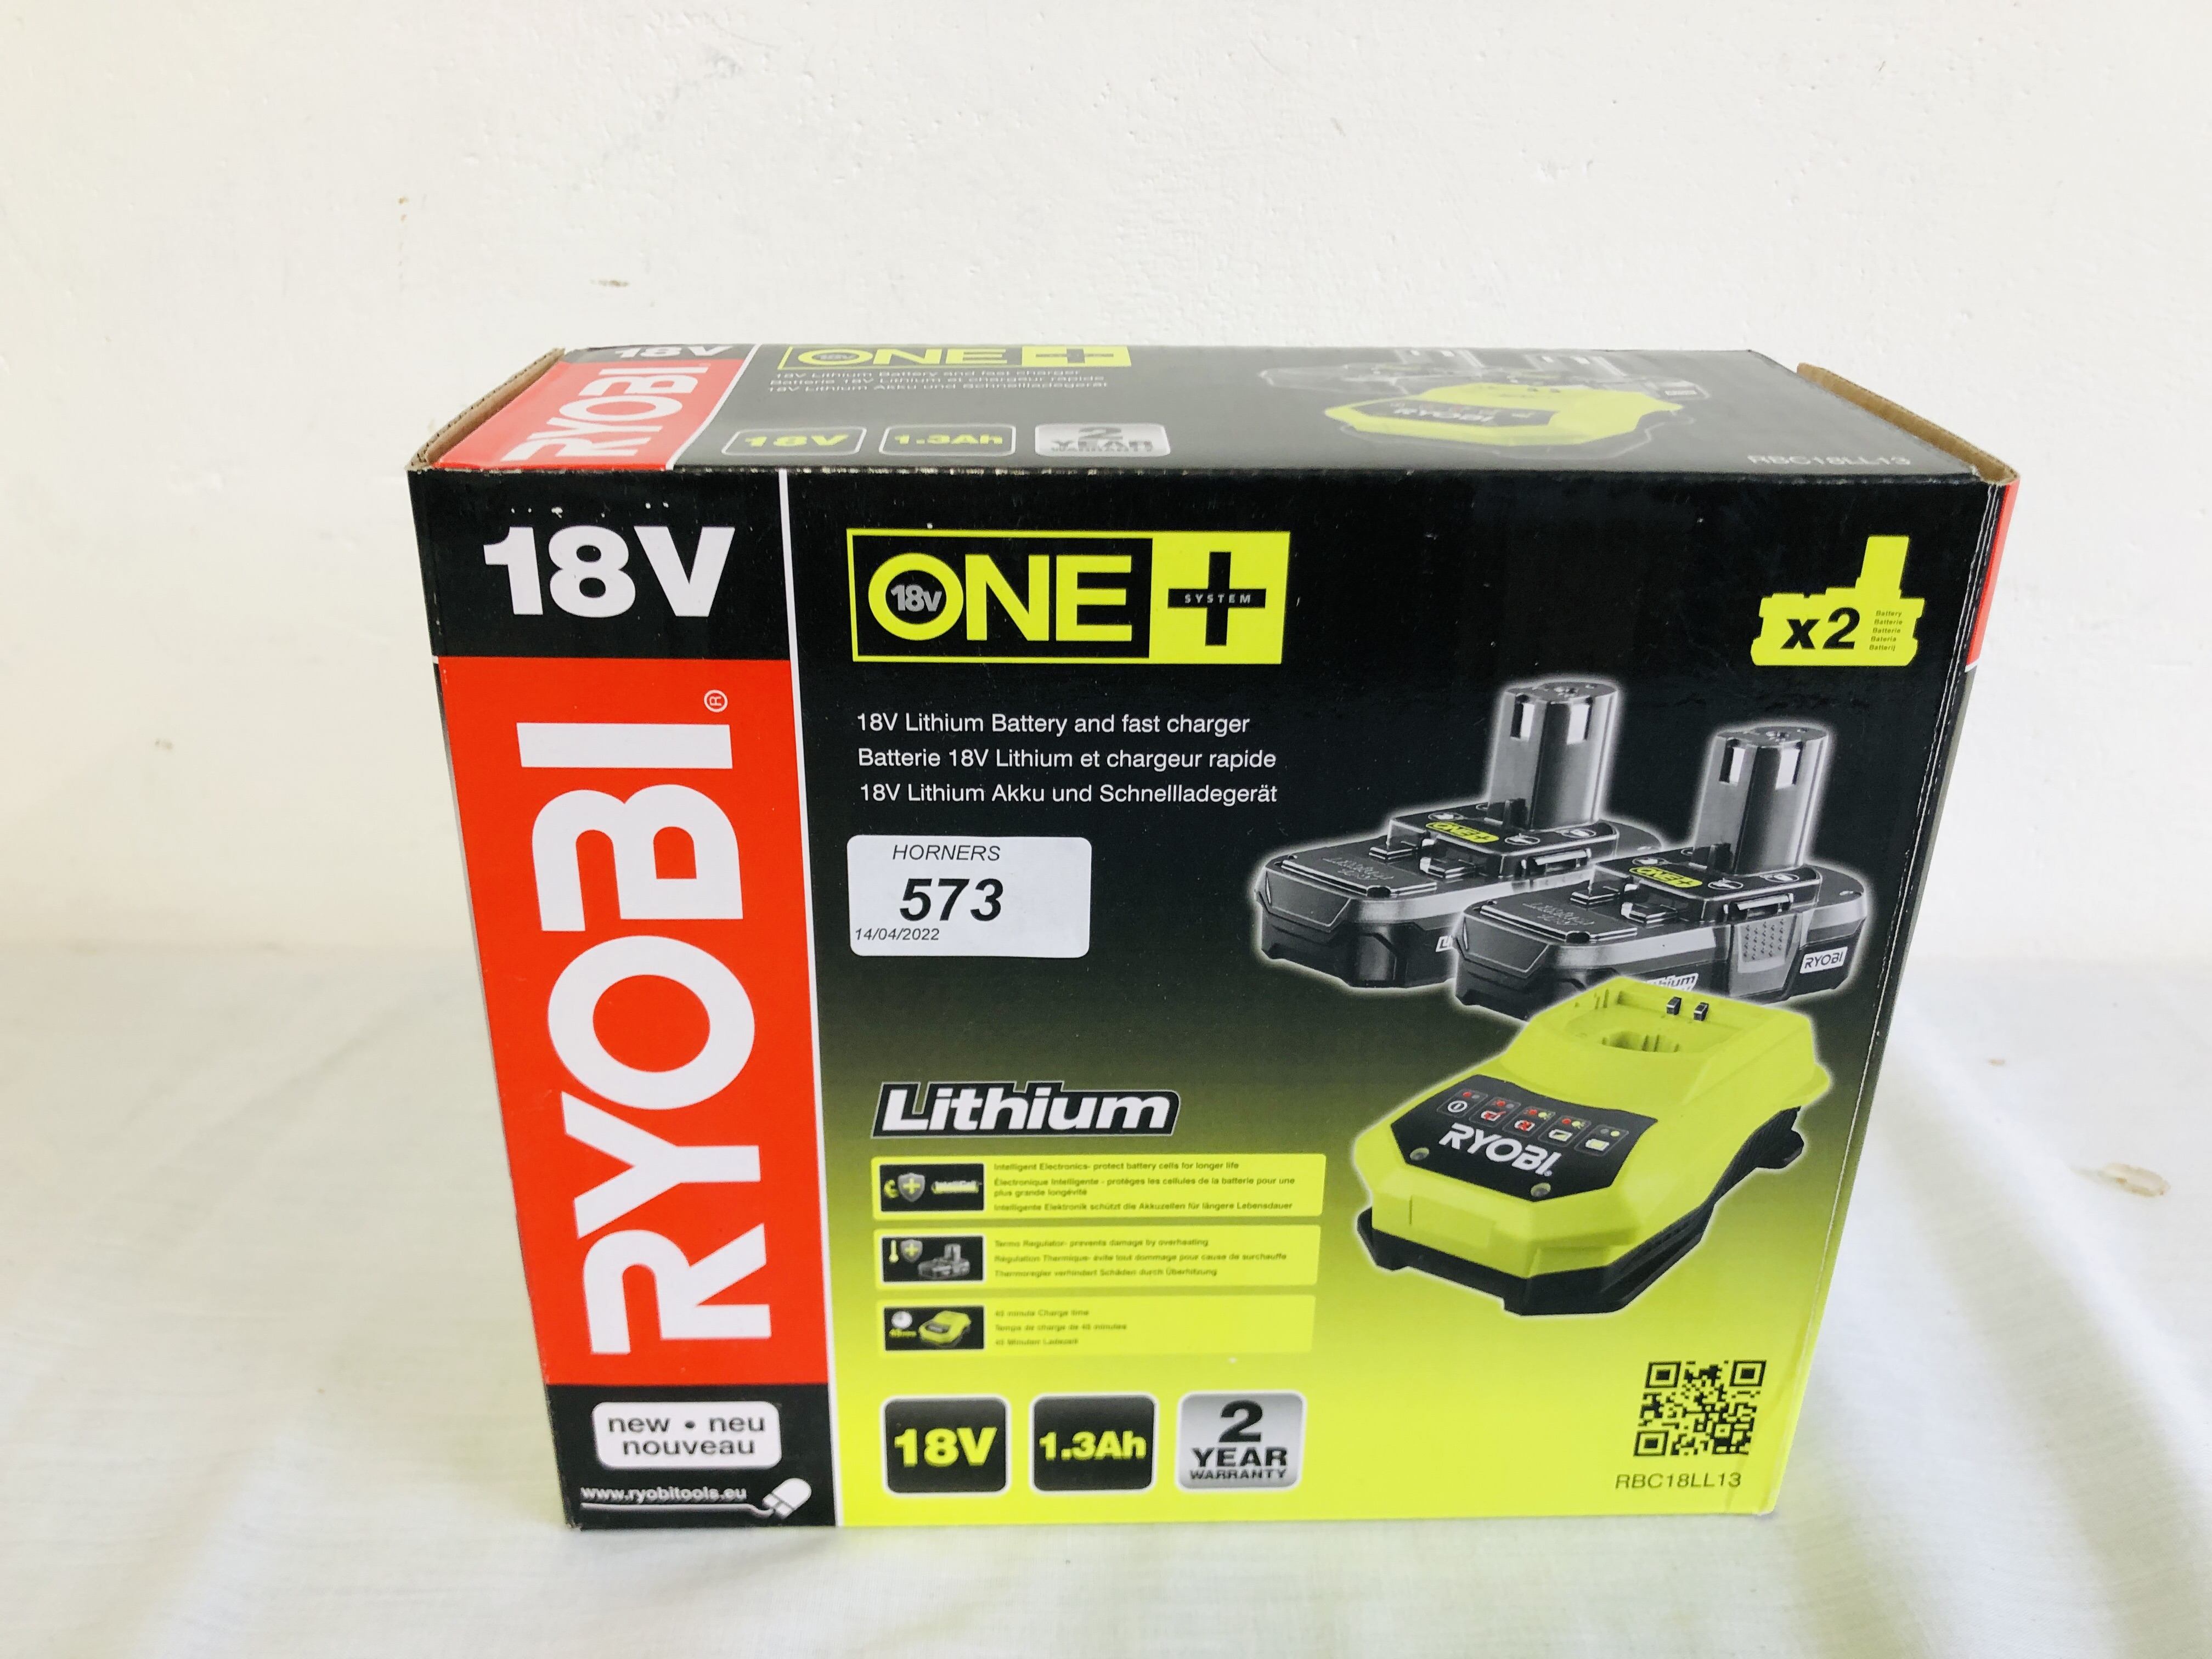 RYOBI 18 VOLT ONE+ 2X1.3AH 18 VOLT BATTERY PACK AND CHARGER (BOXED AS NEW) - SOLD AS SEEN.